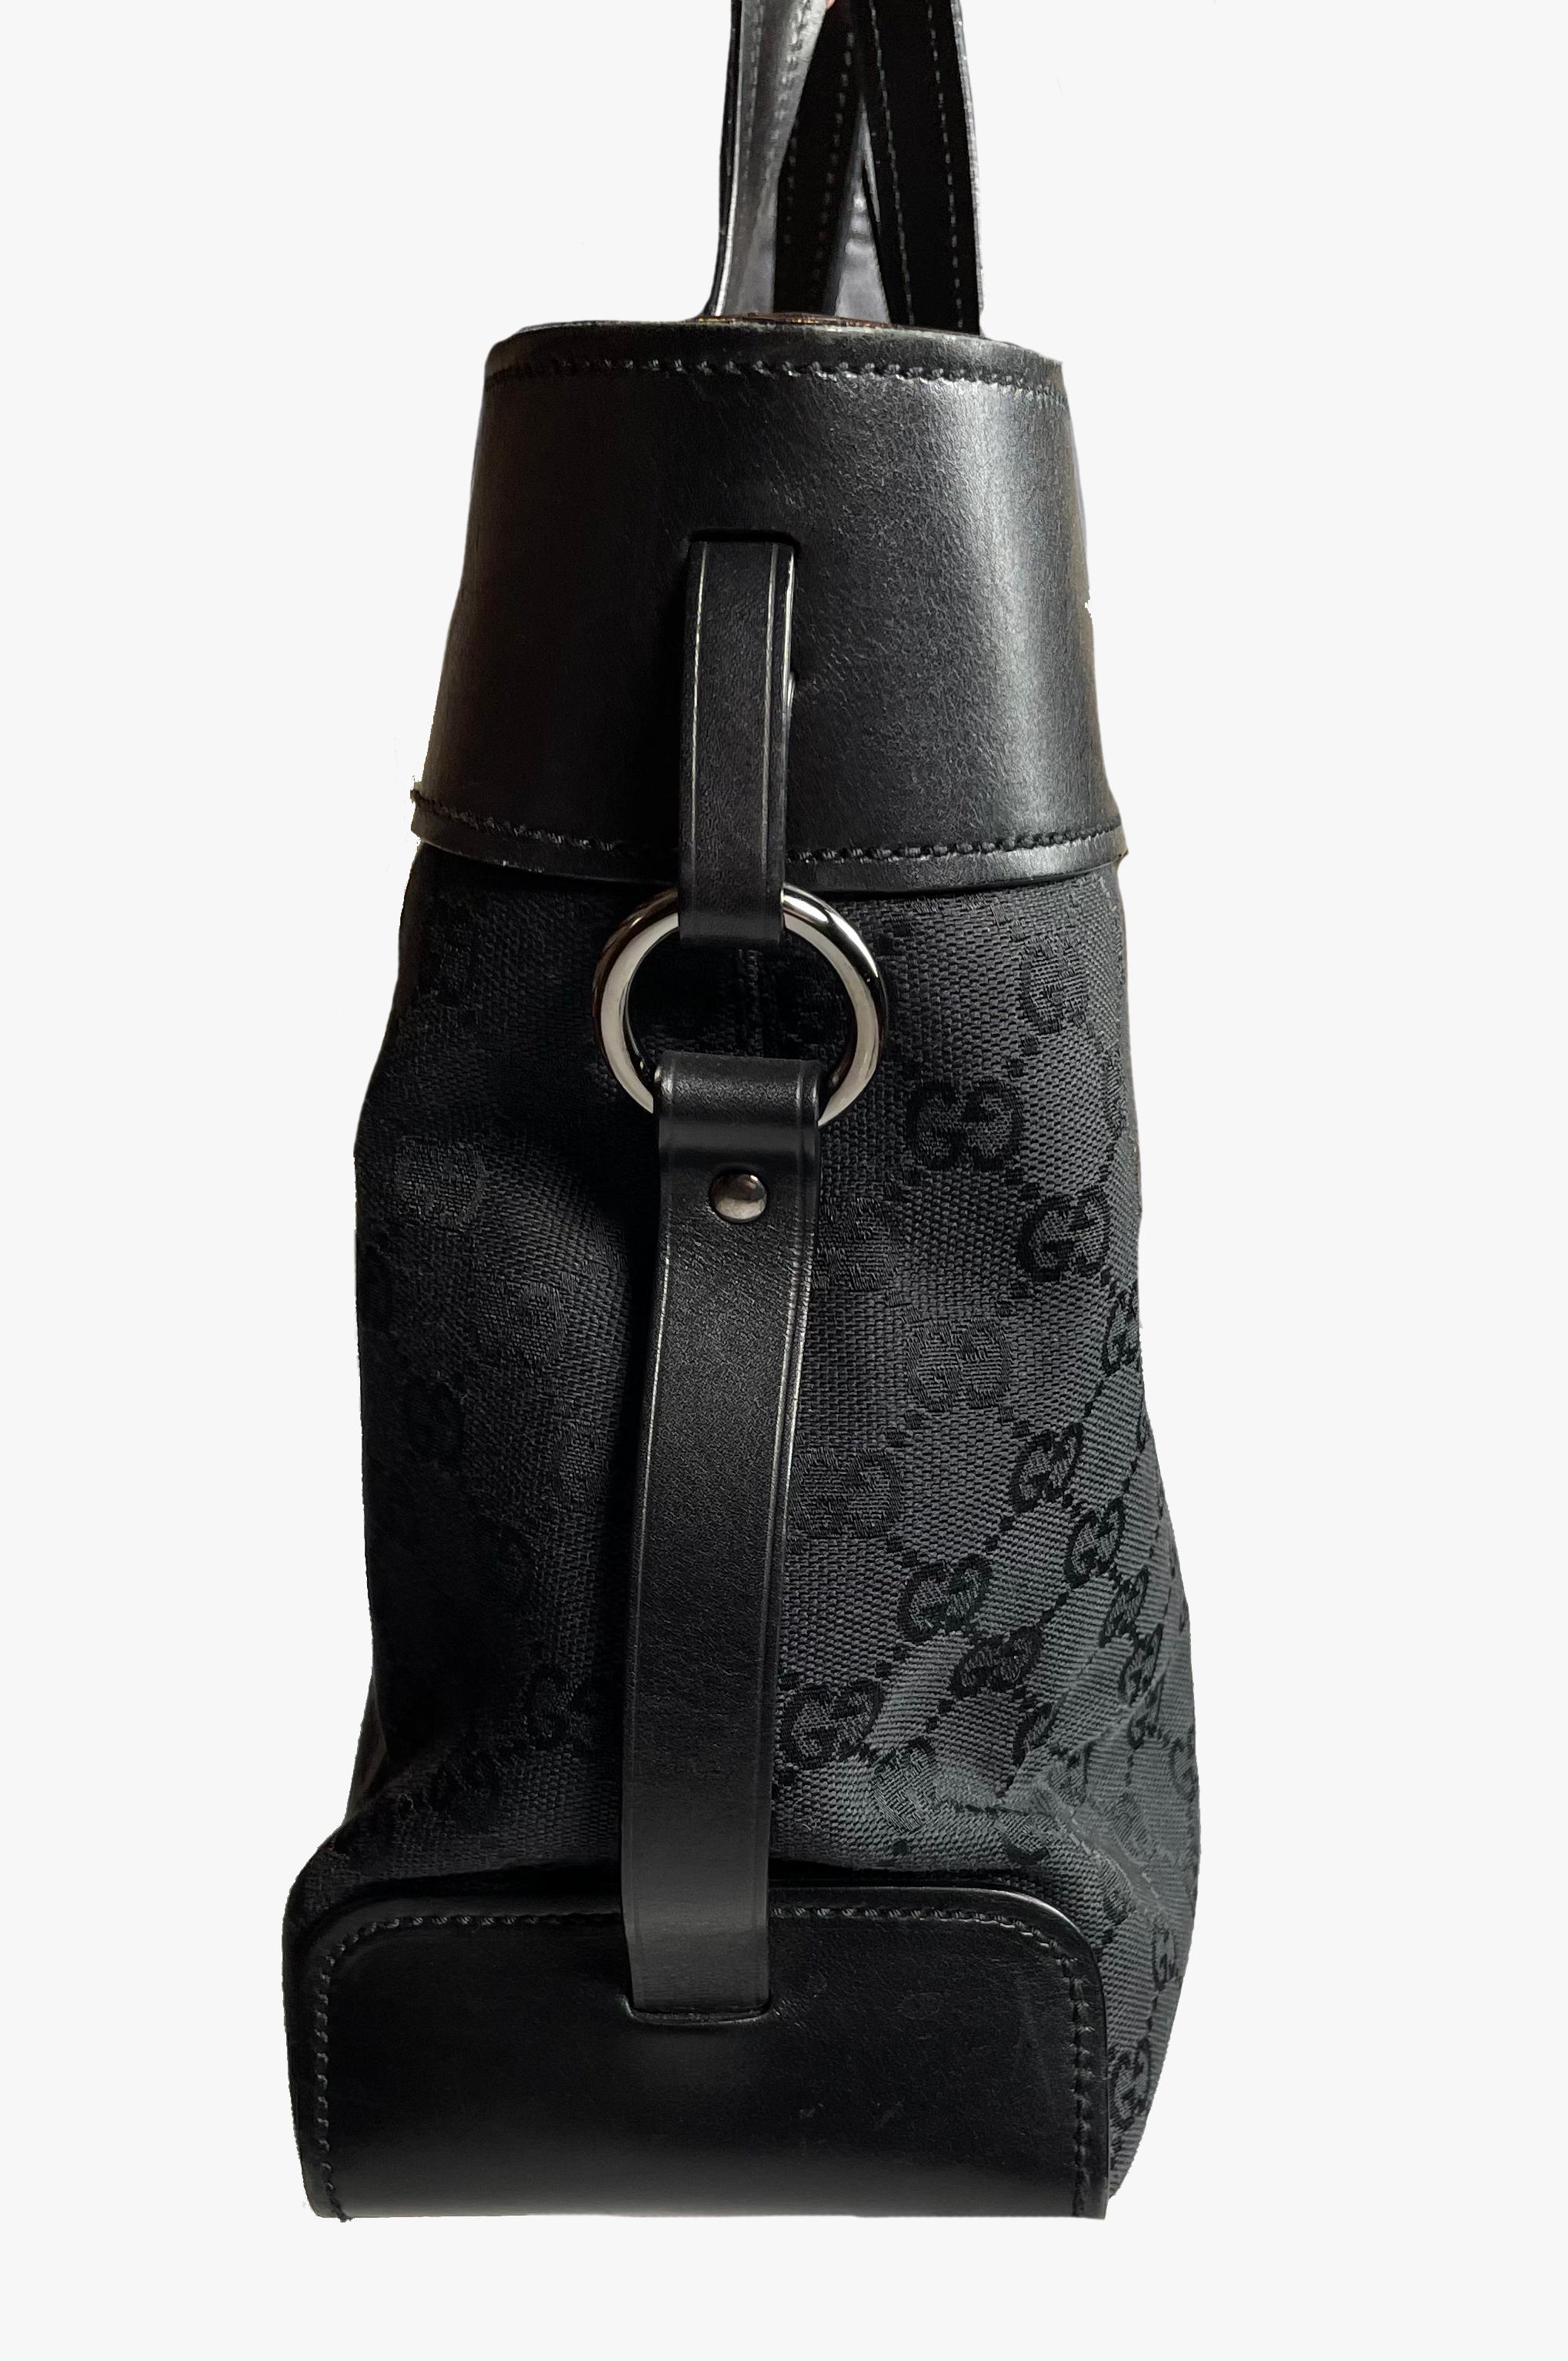 Women's Gucci GG Logo Tote Bag by Tom Ford, 2000s